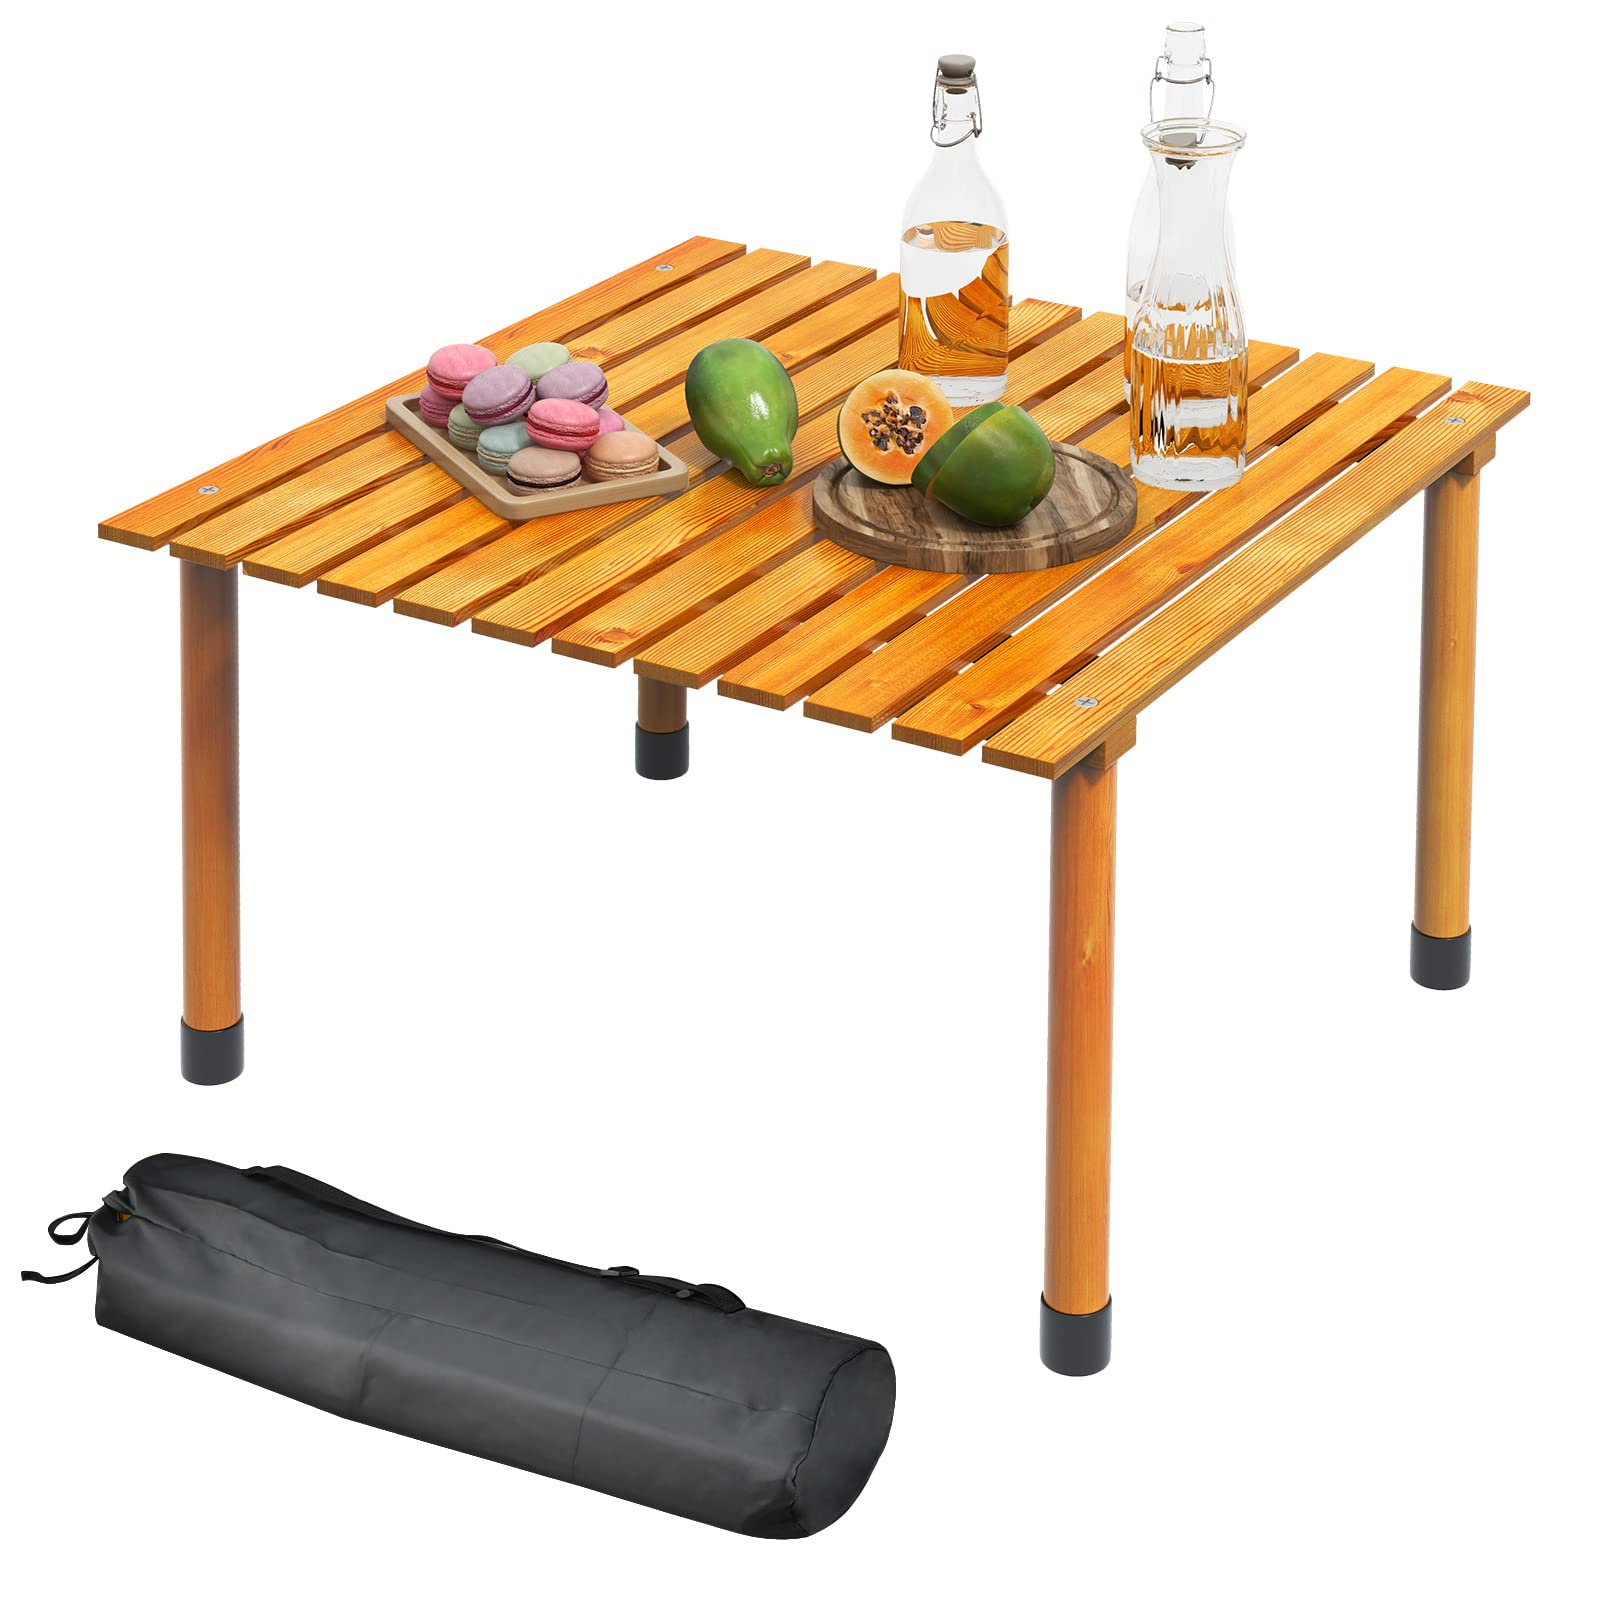 Giantex Portable Camping Table, Folding Picnic Table with Carrying Bag & Roll-up Tabletop